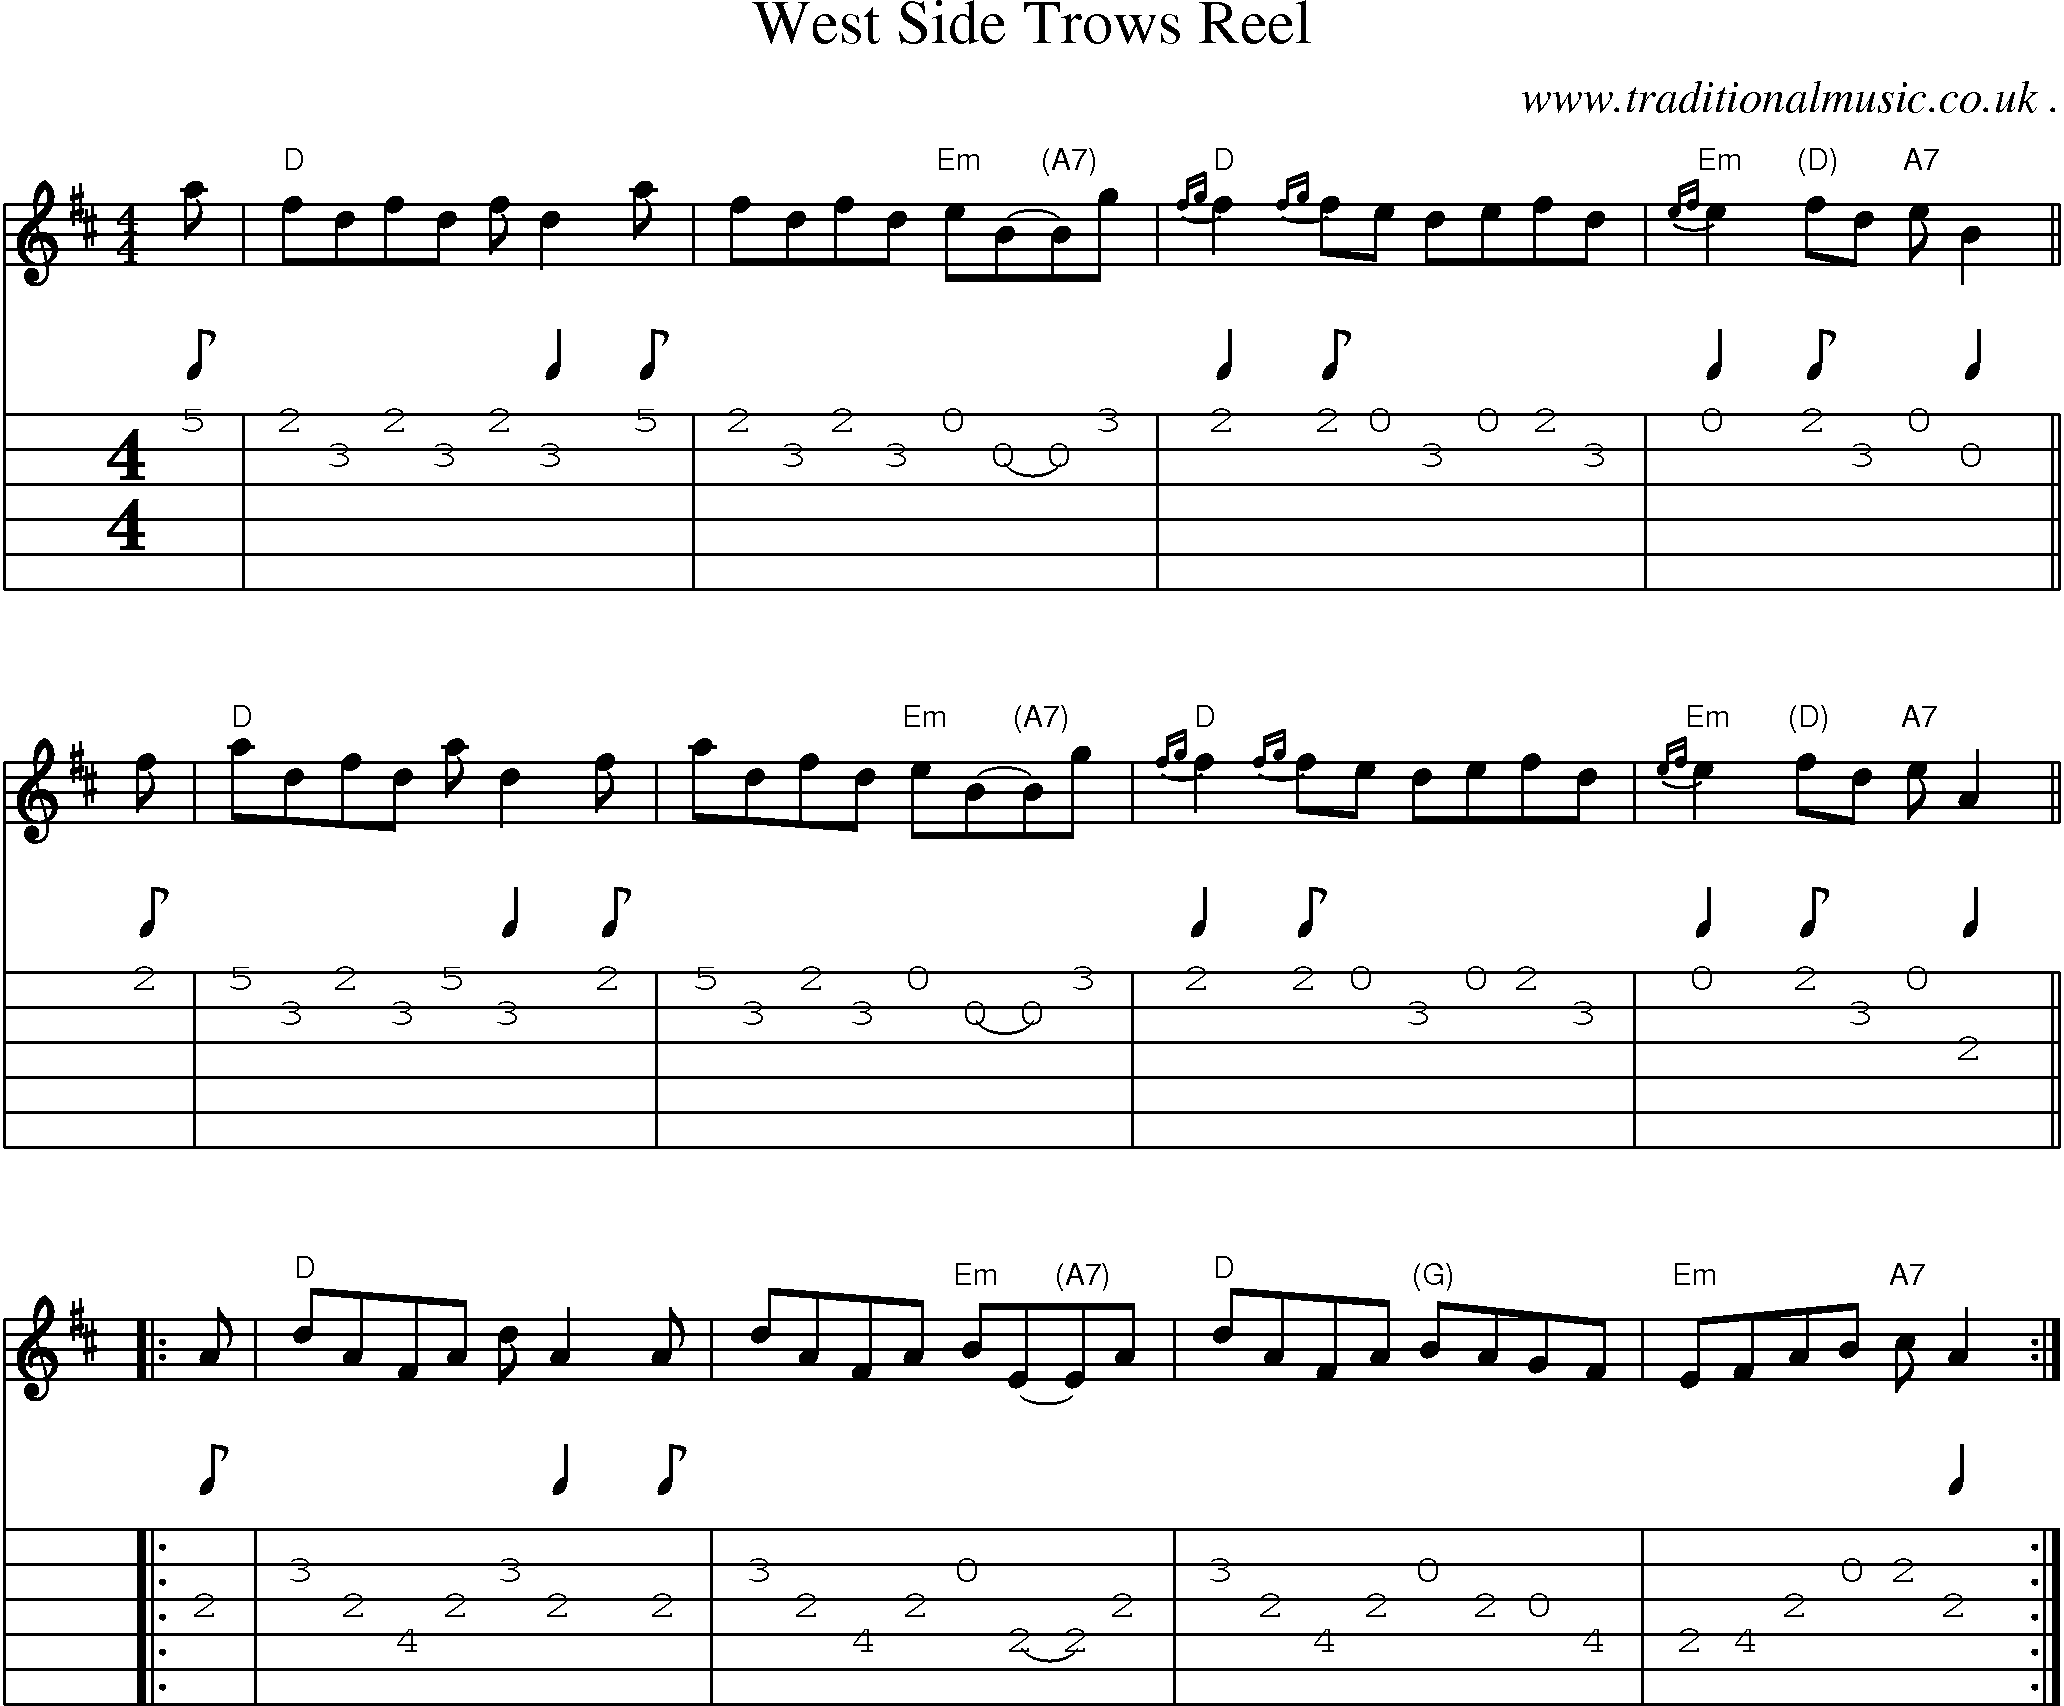 Sheet-music  score, Chords and Guitar Tabs for West Side Trows Reel